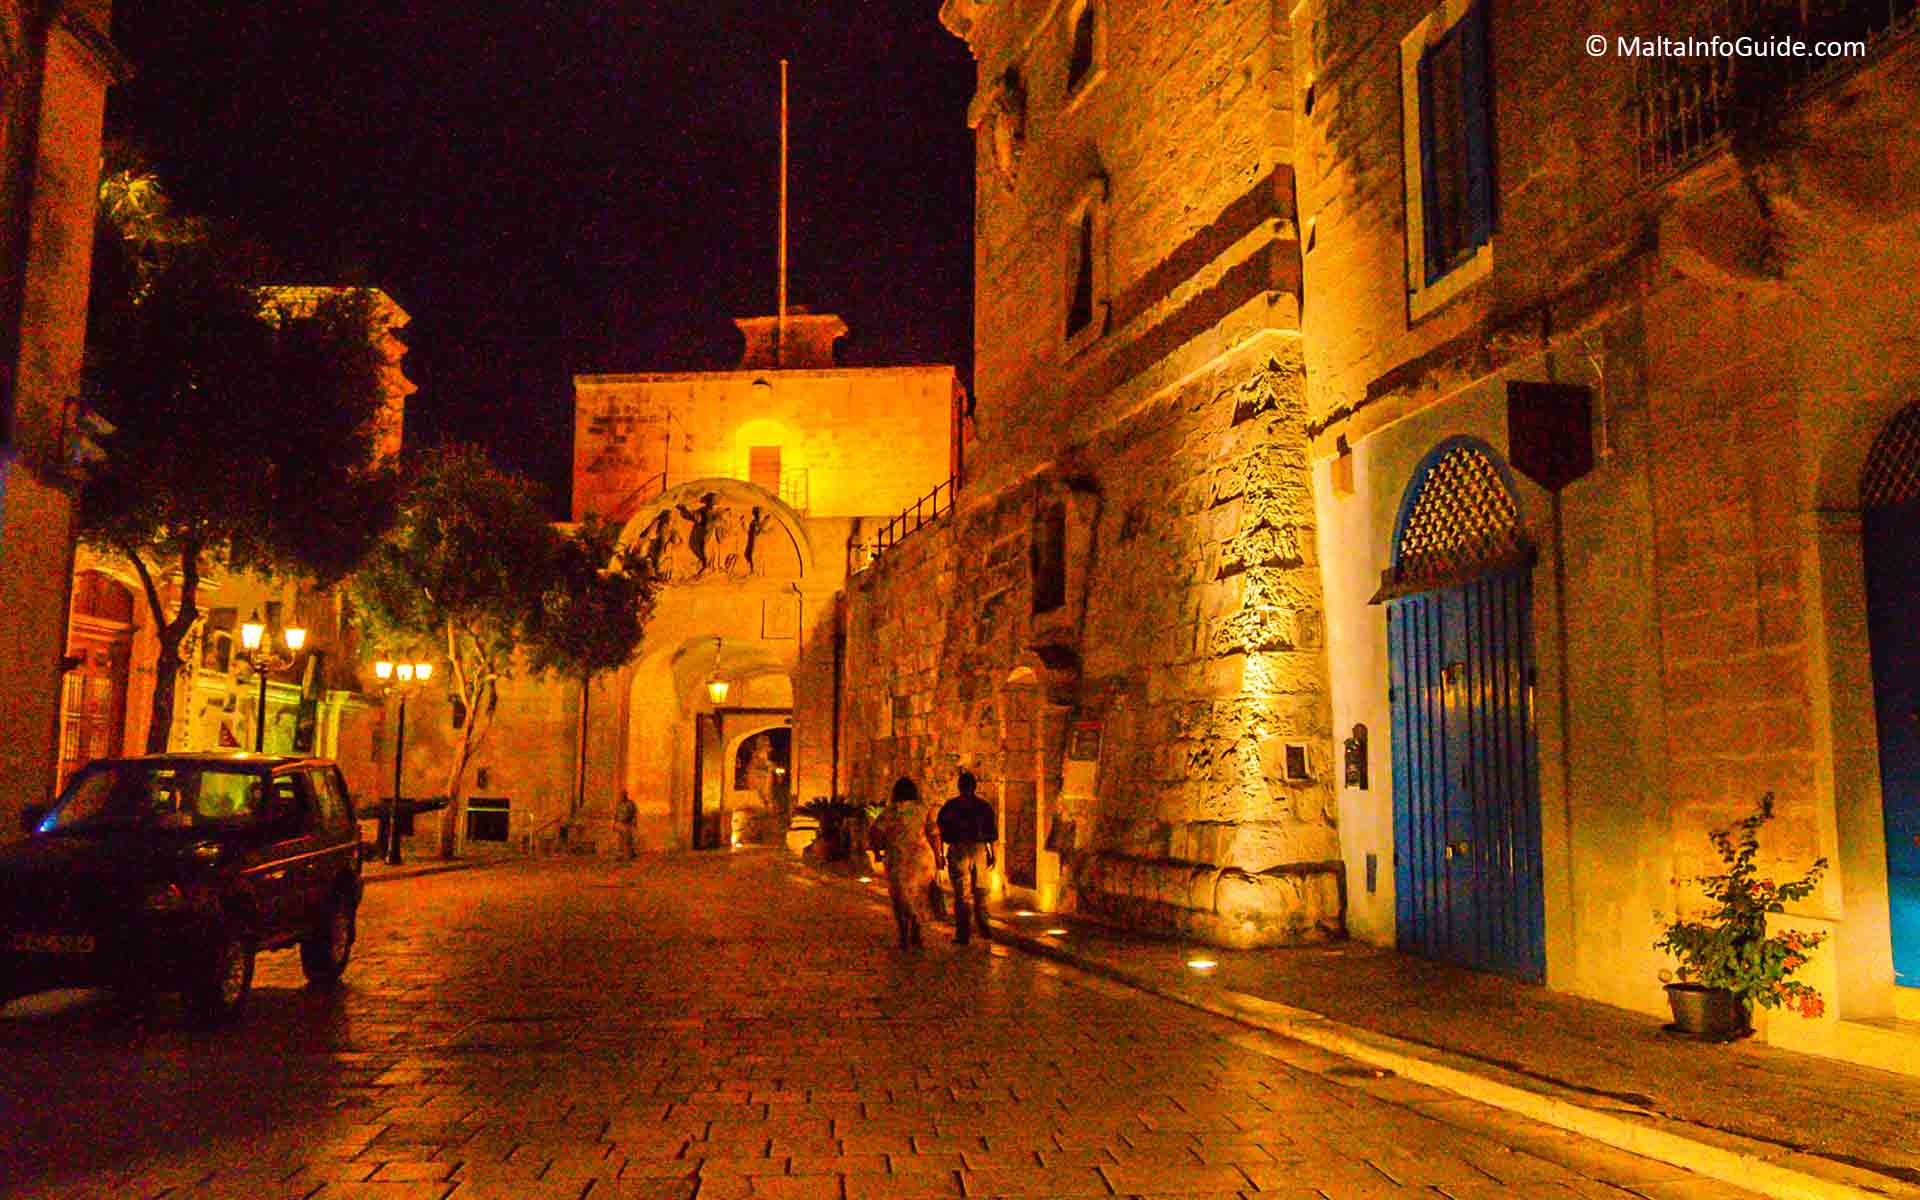 Two people walking out of Mdina at night.